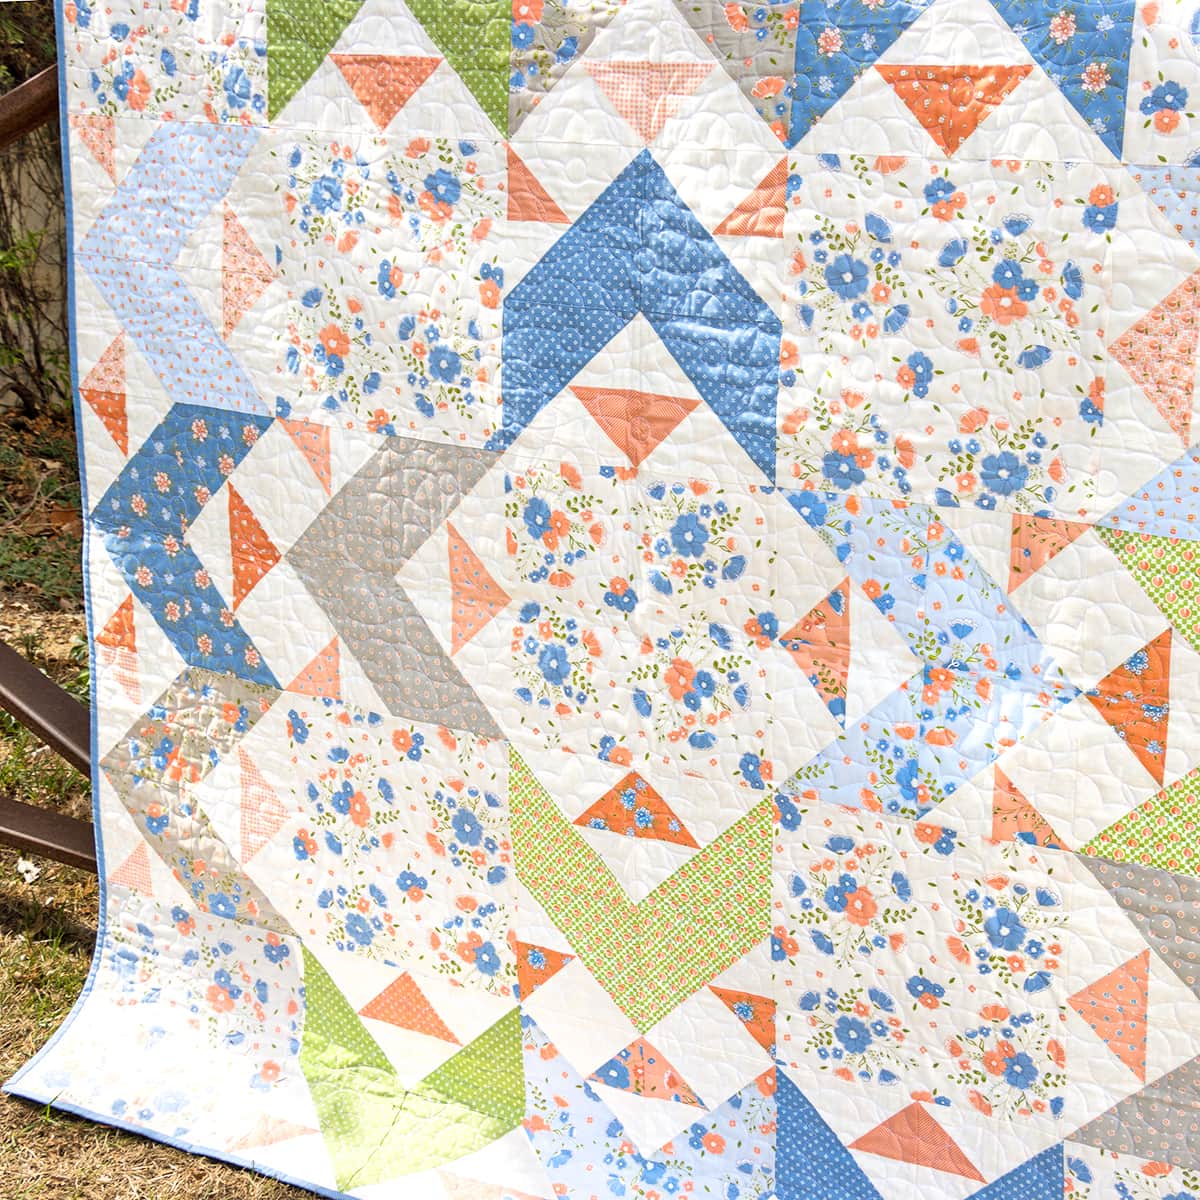 Classic & Vintage – Ribbon Border Quilt and FREE Quilt Block Tutorial